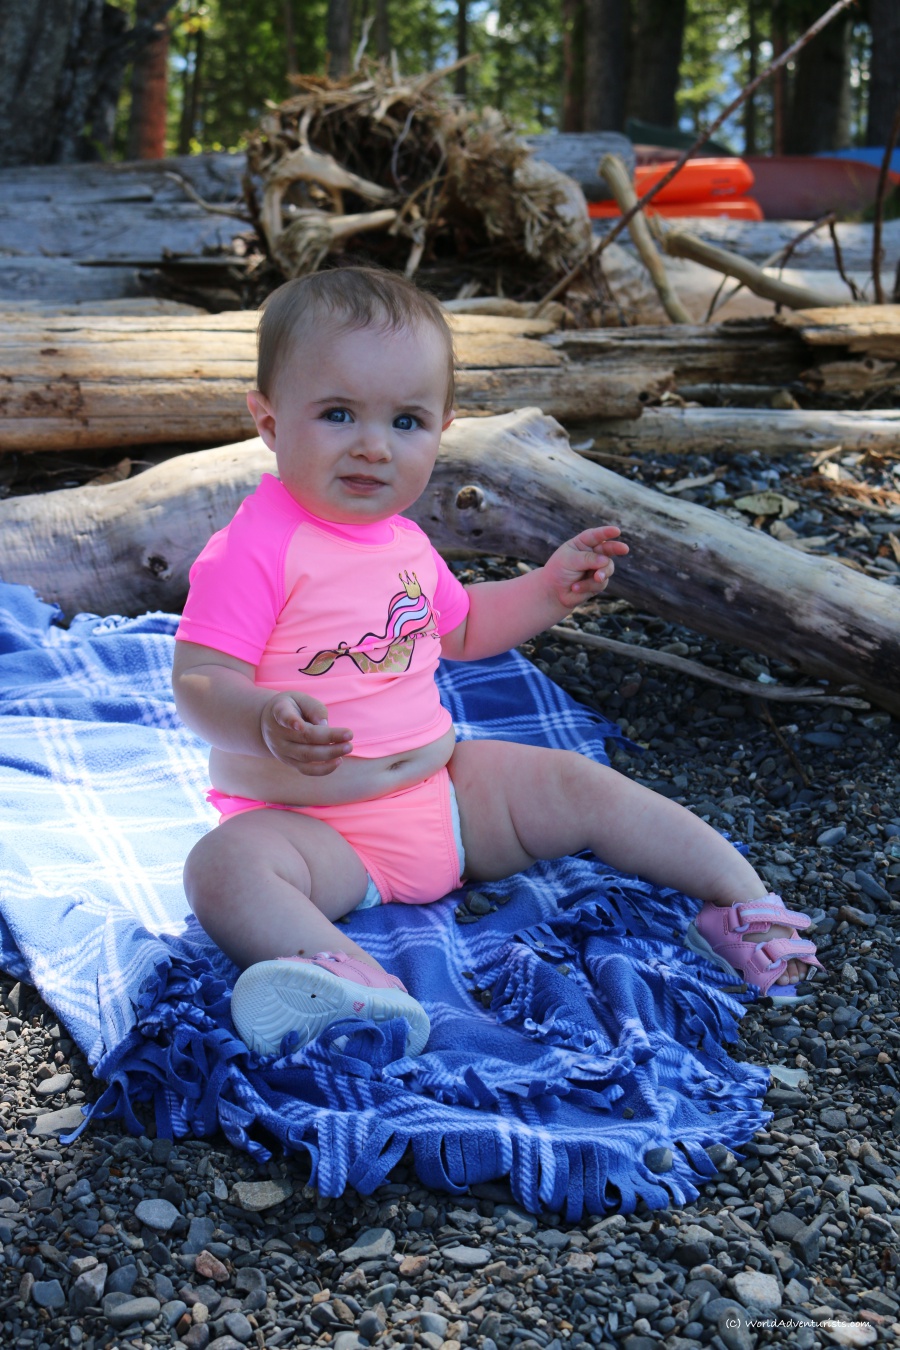 Baby enjoying the beach area of Slocan Lake in New Denver